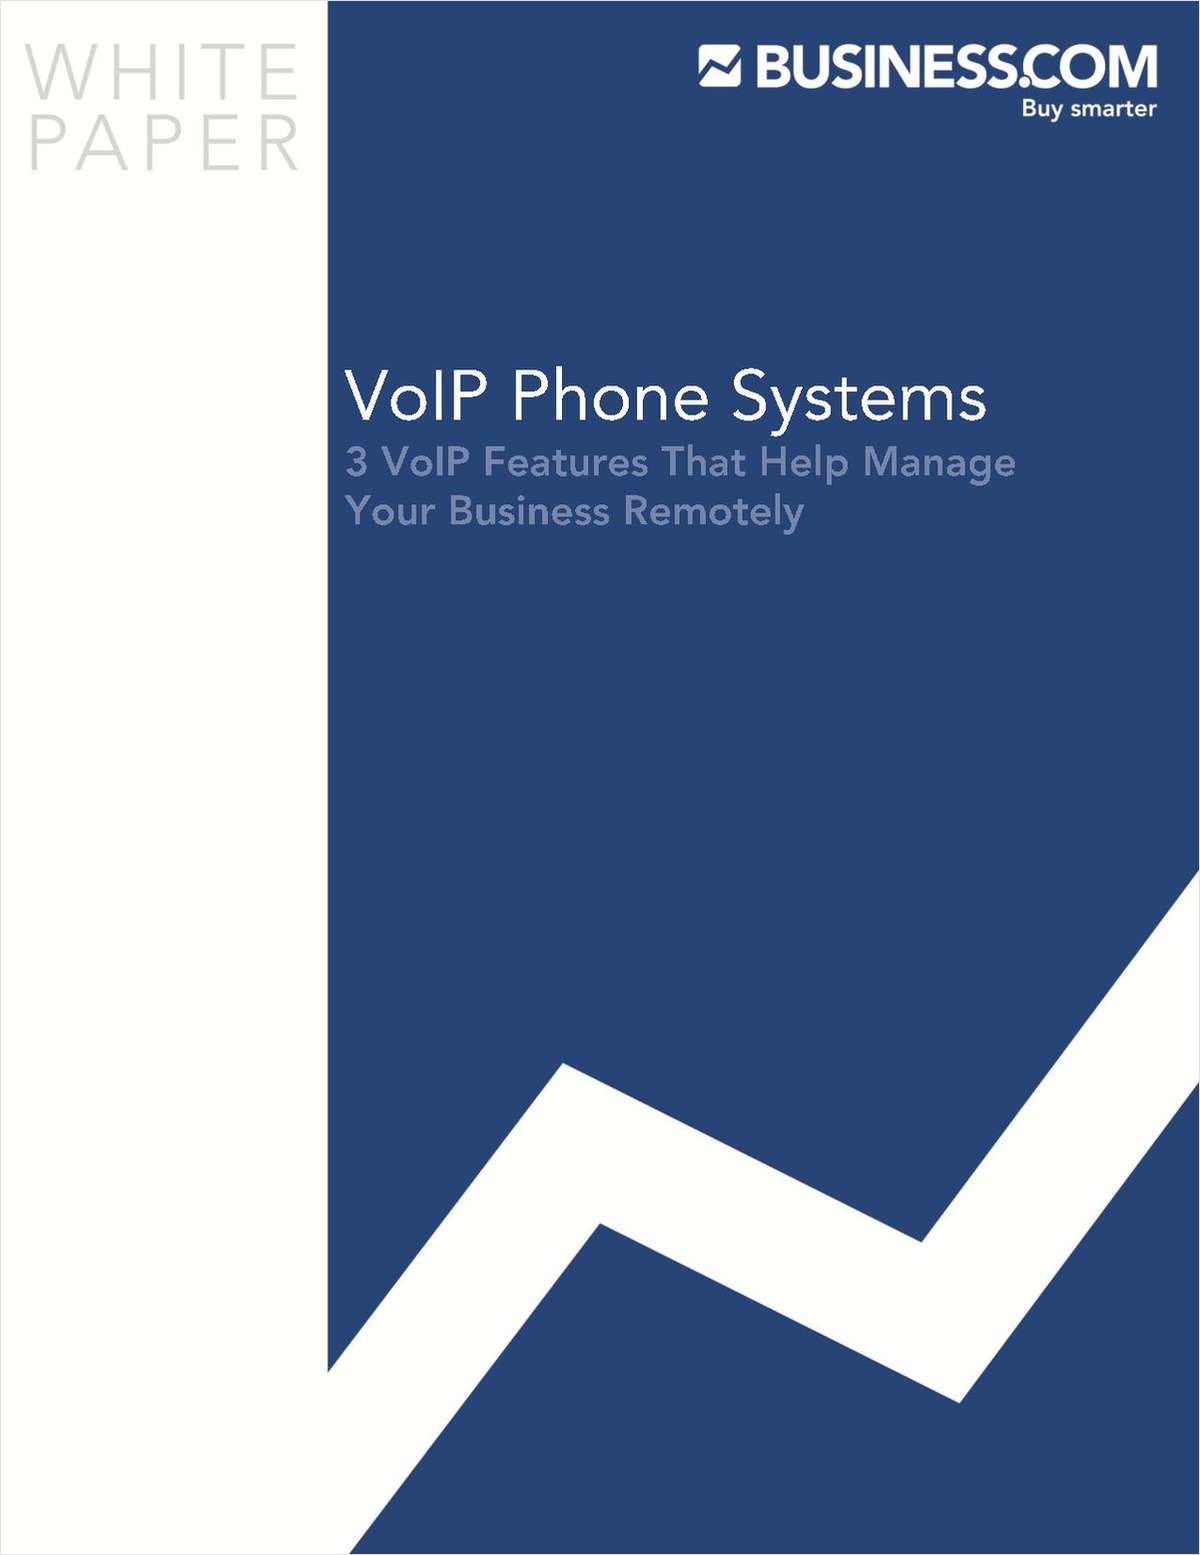 3 VoIP Features That Help Manage Your Business Remotely